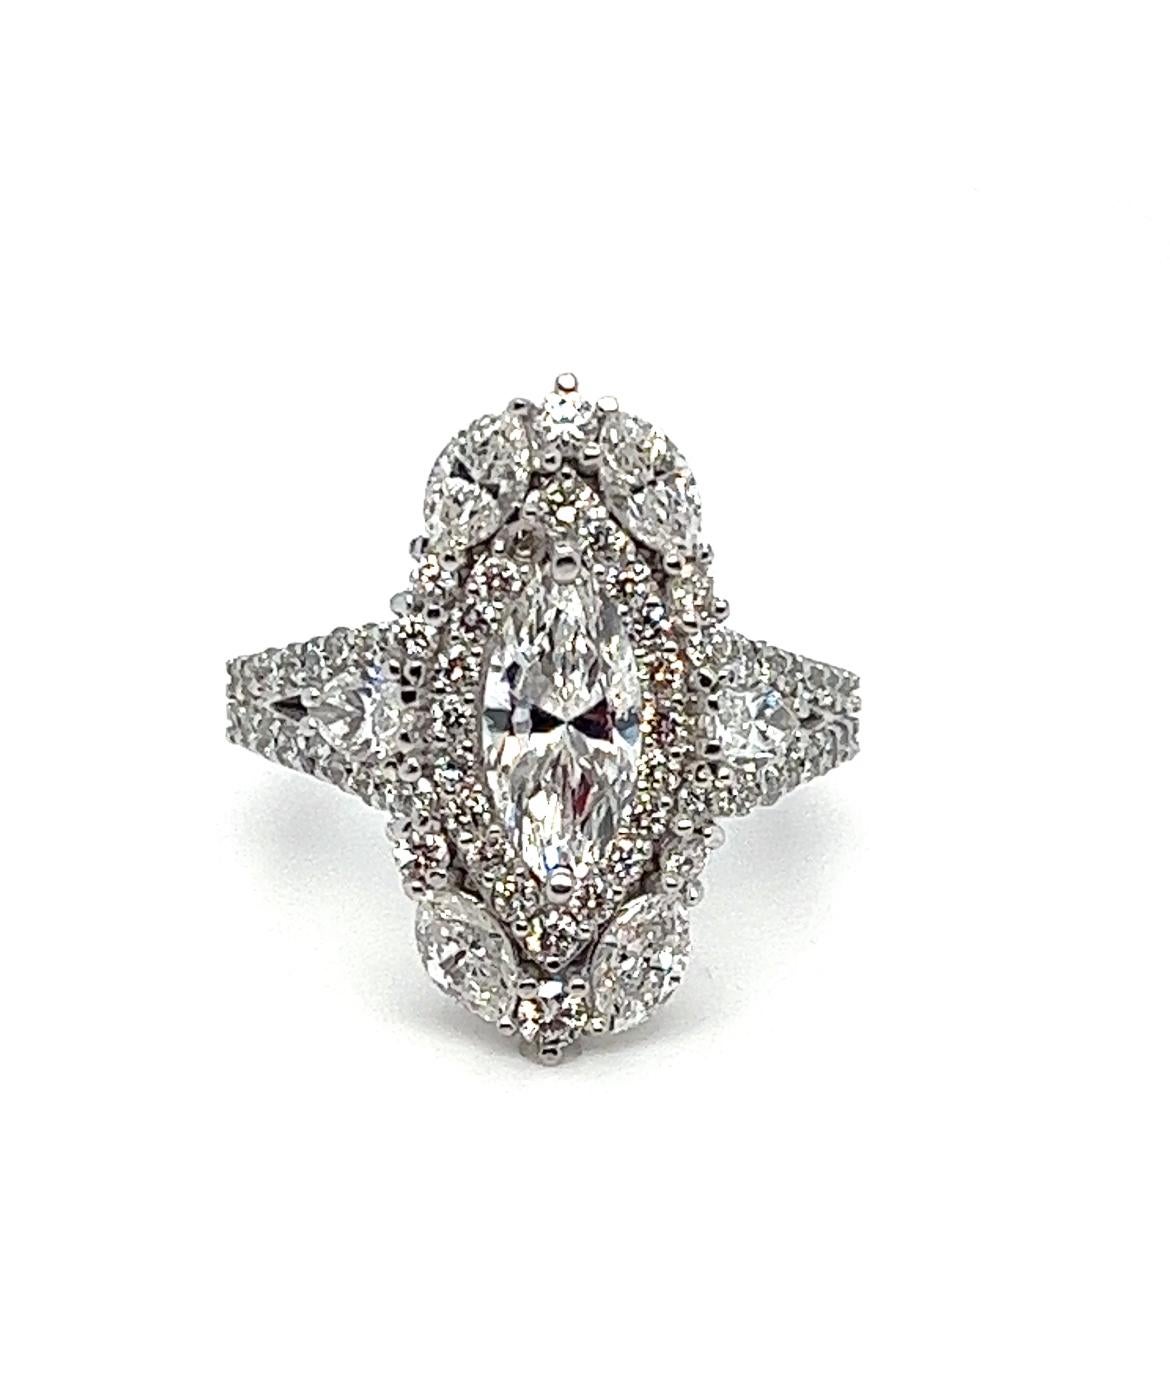 Stunning 2.99 Carat Total Weight Marquise Diamond Ring in 18K White Gold For Sale 2